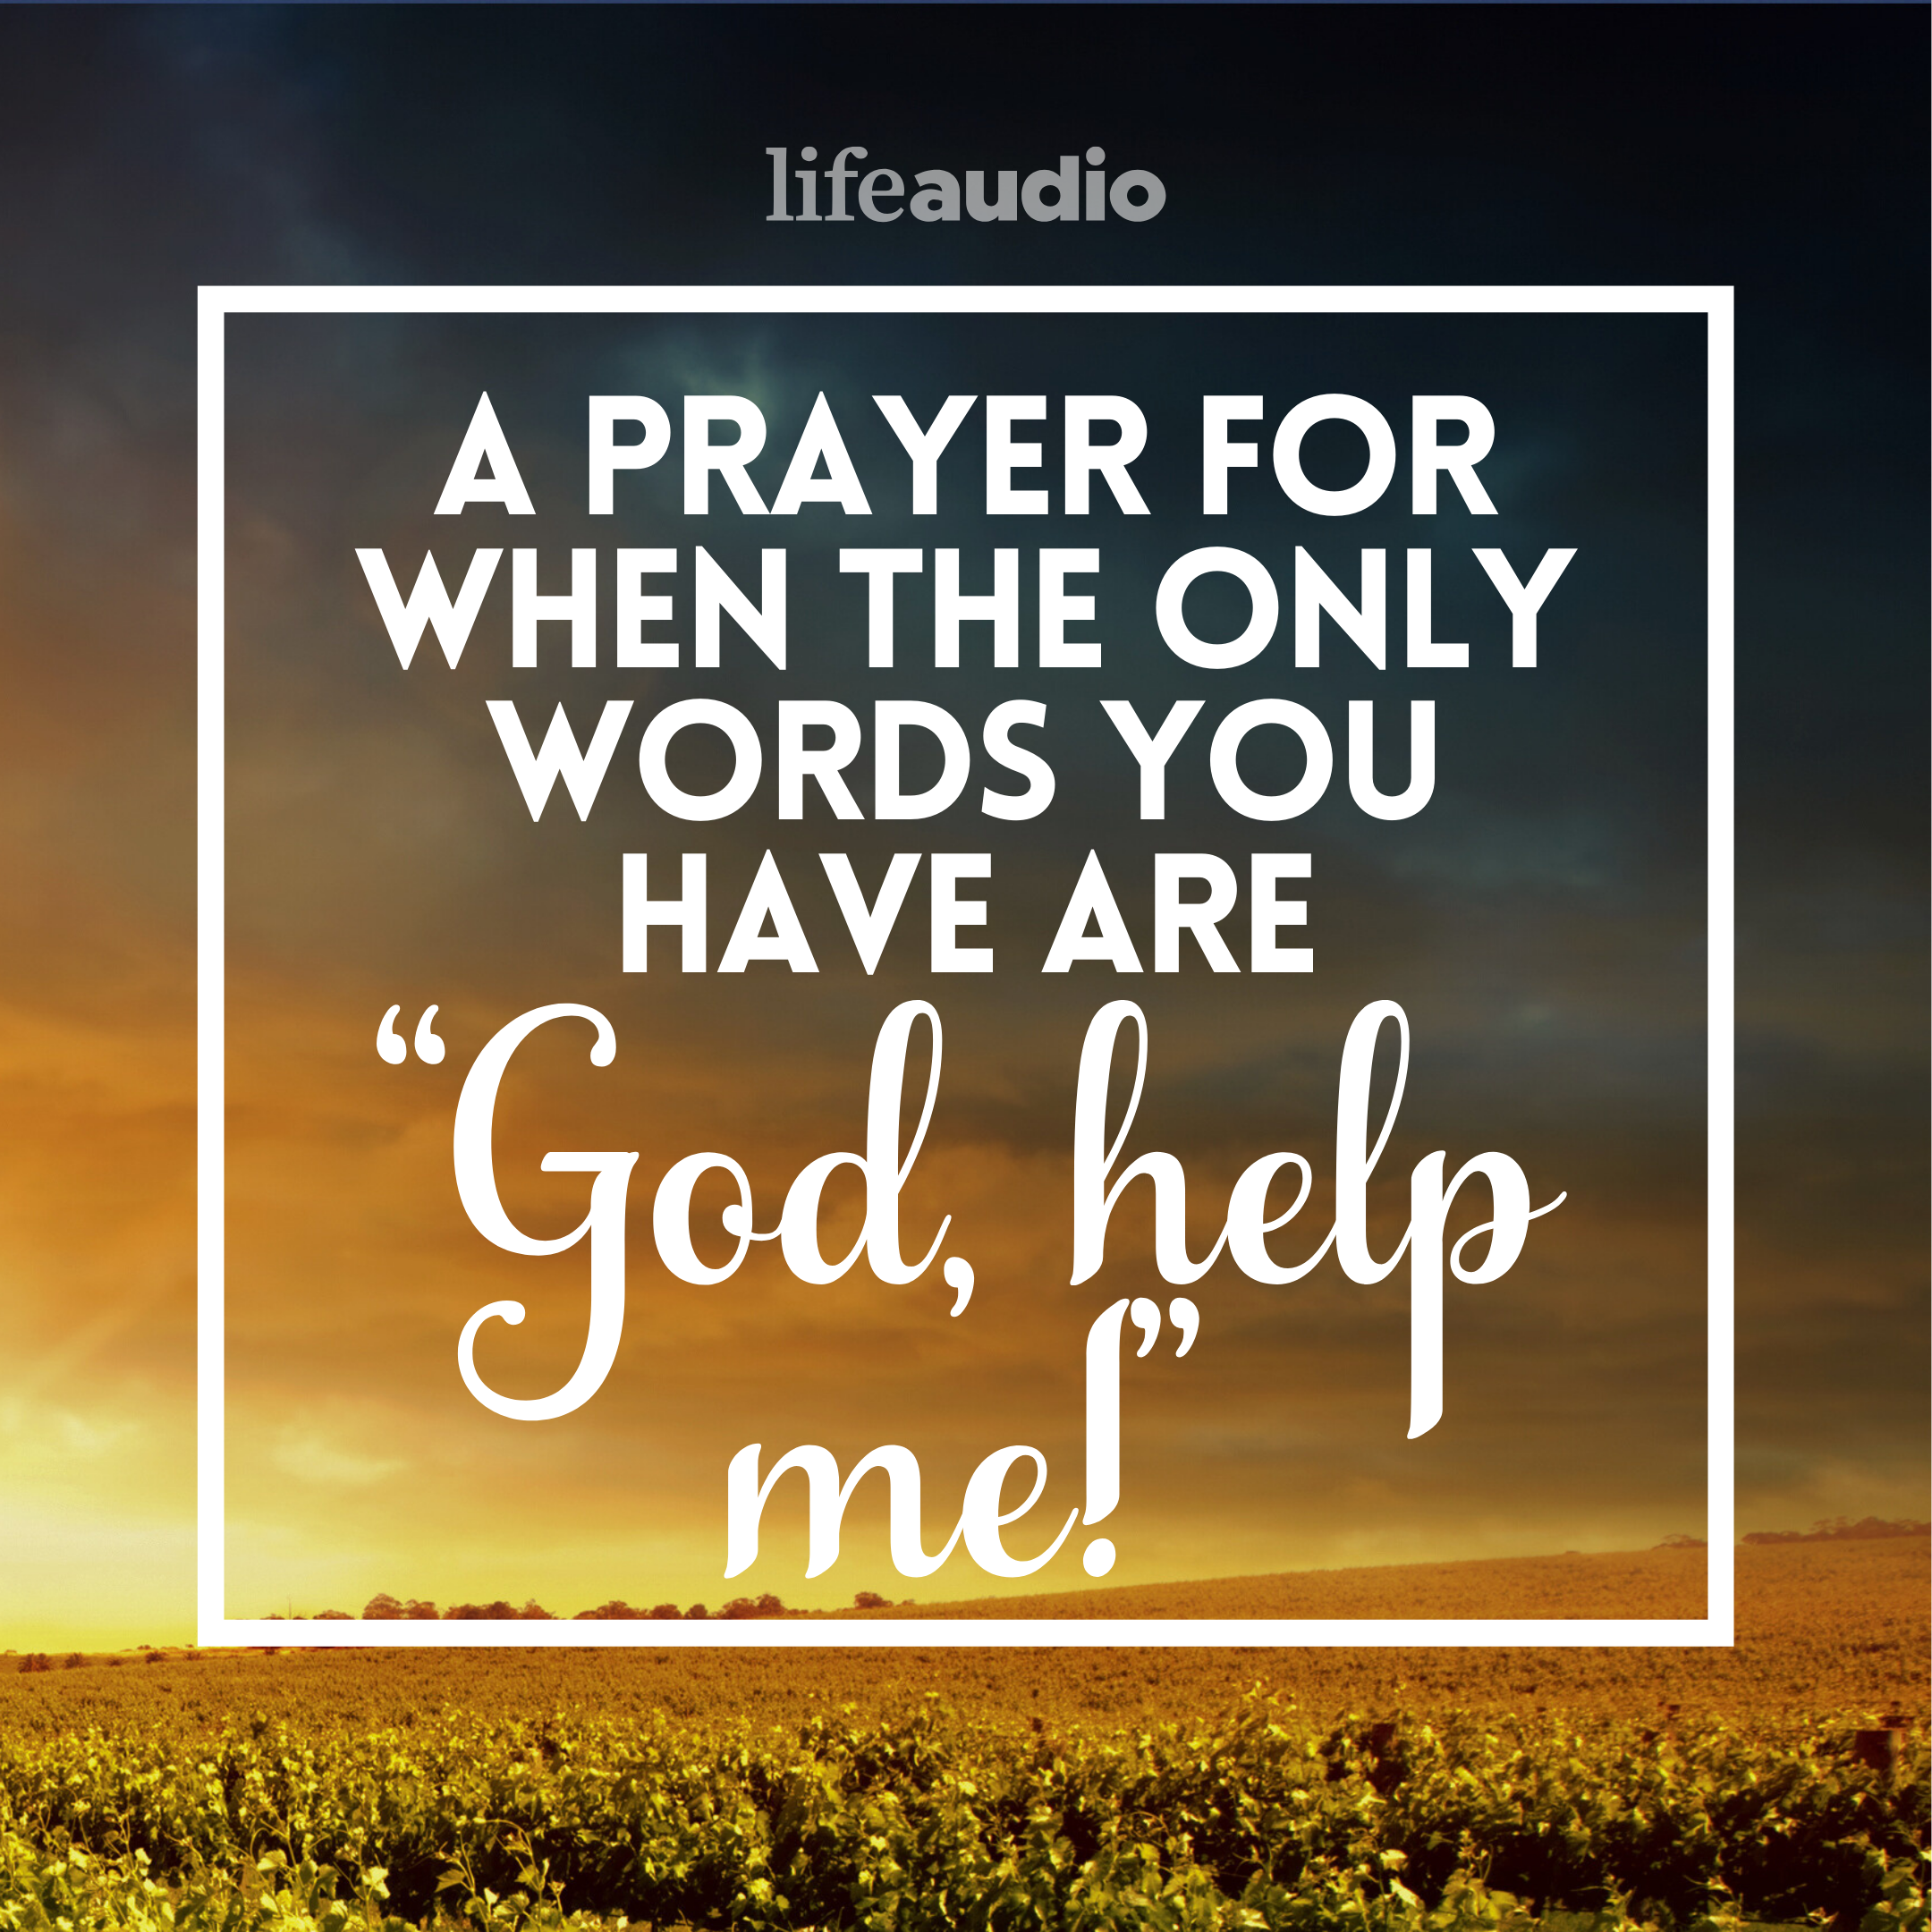 A Prayer for When the Only Words You Have Are 'God, Help Me!'